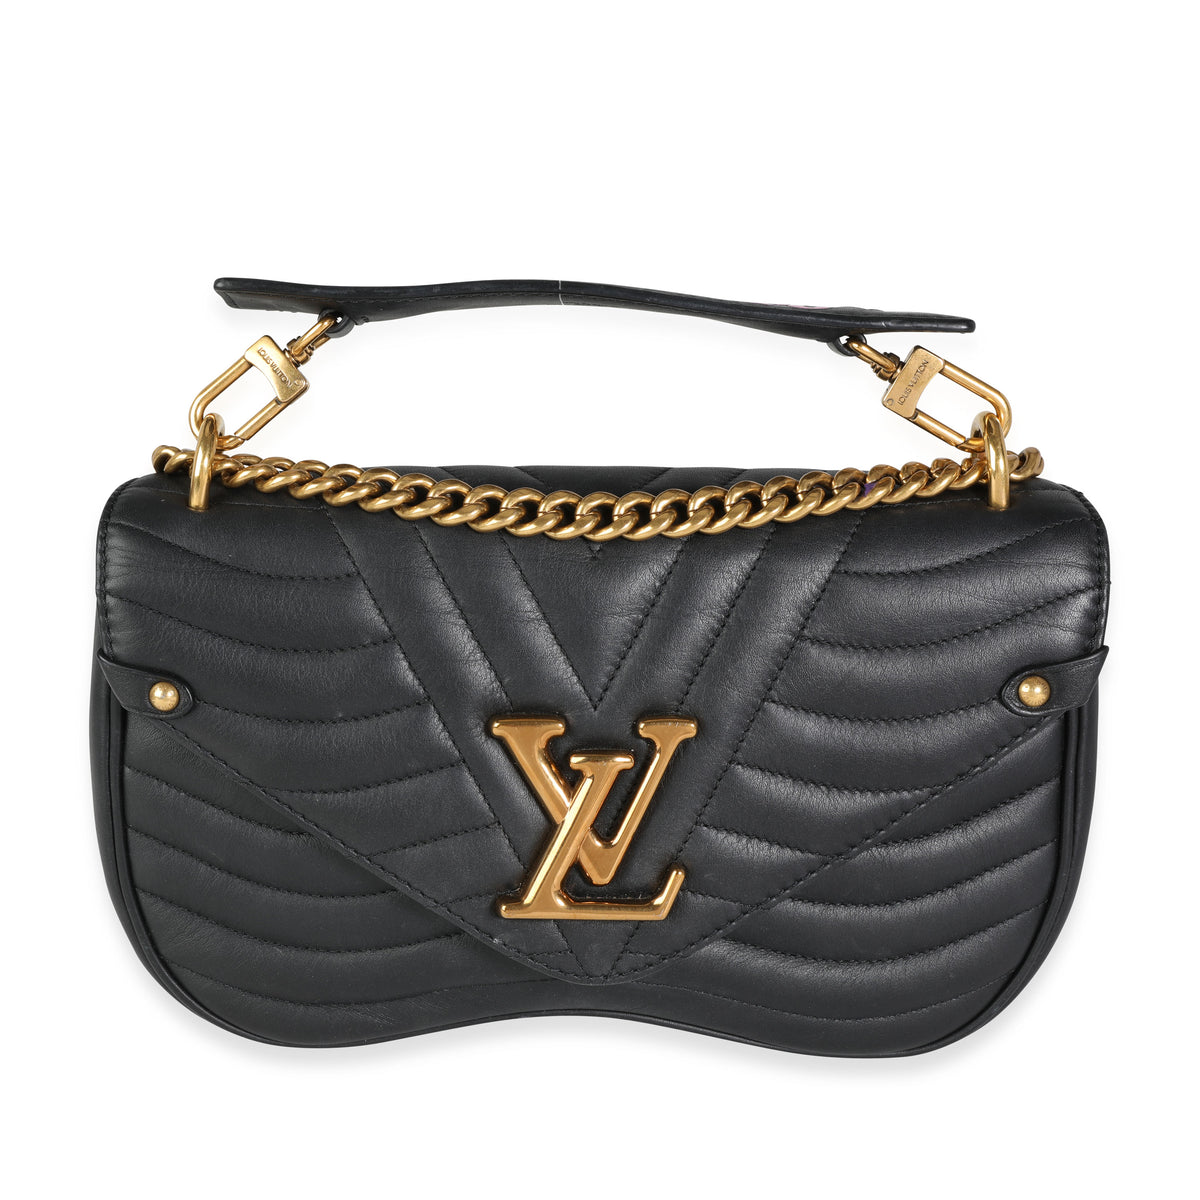 Louis Vuitton's New Wave Bag Is Now Available in Stores